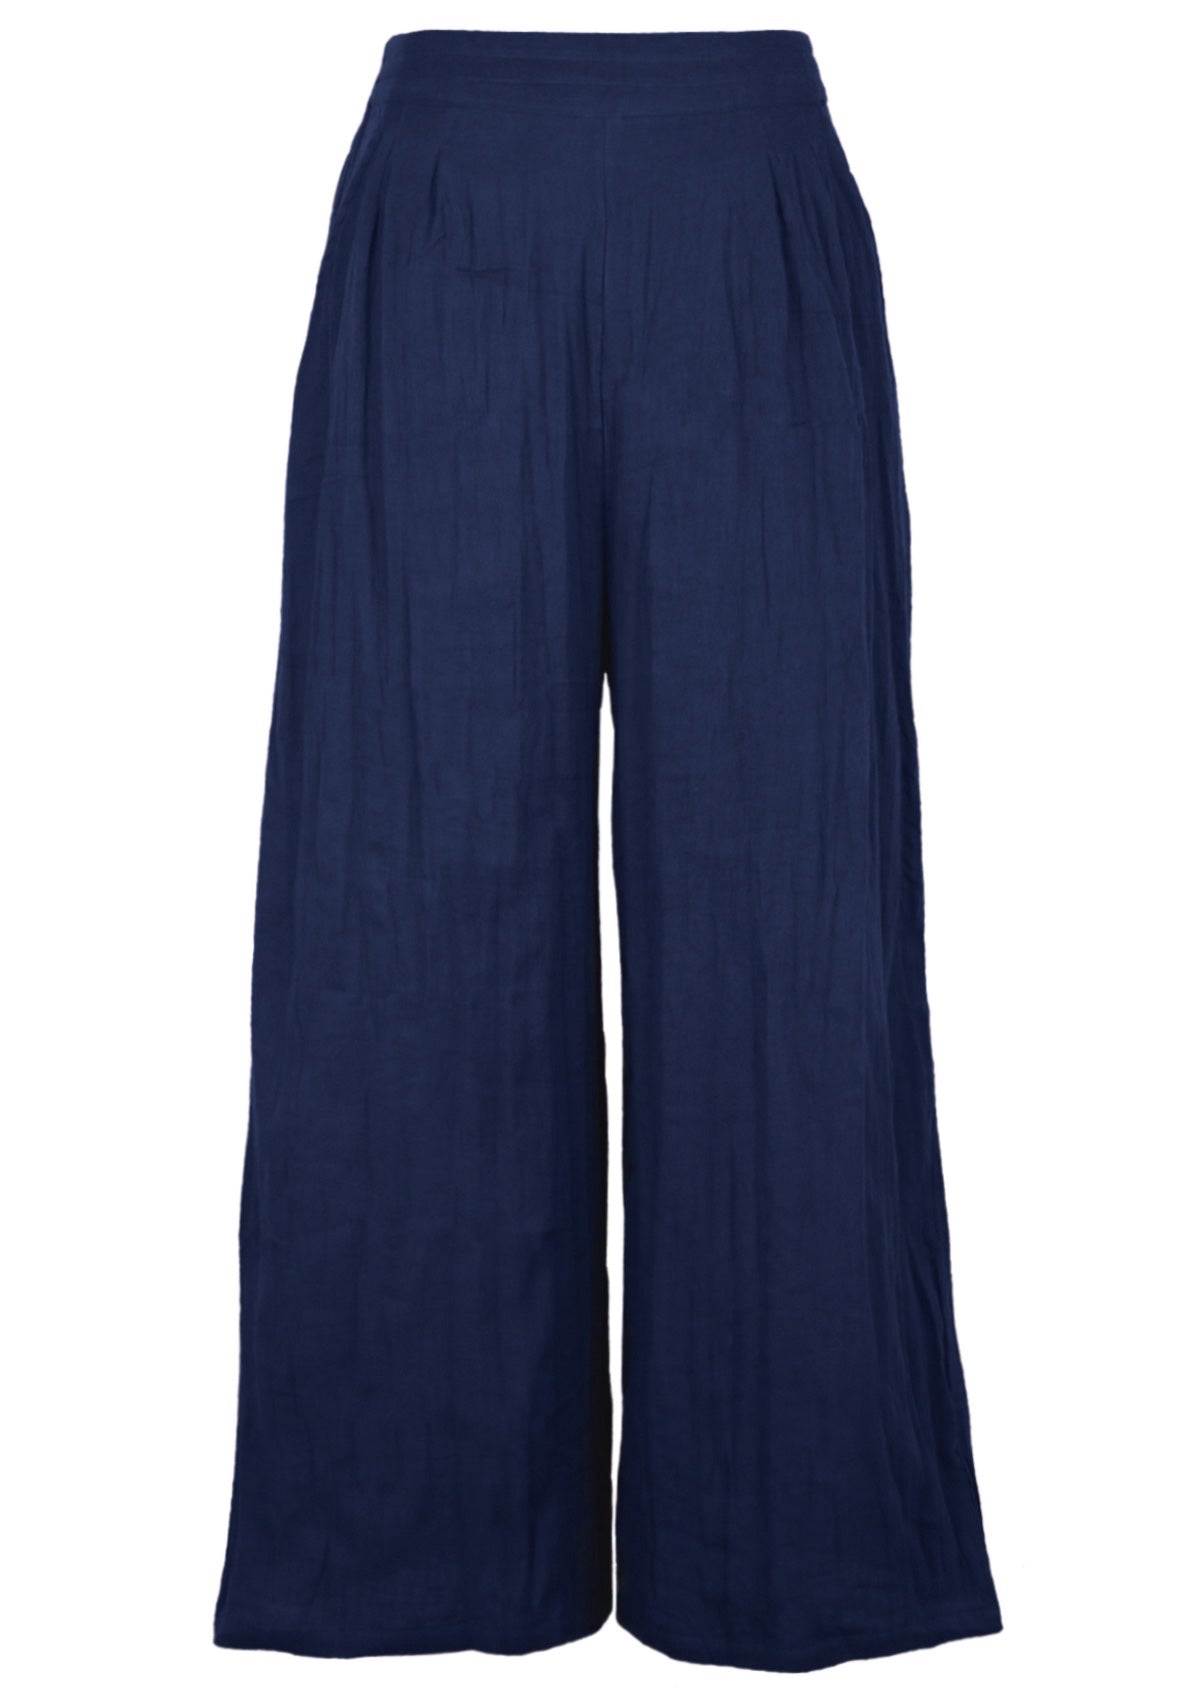 Dark blue pants made form two layers of cotton gauze